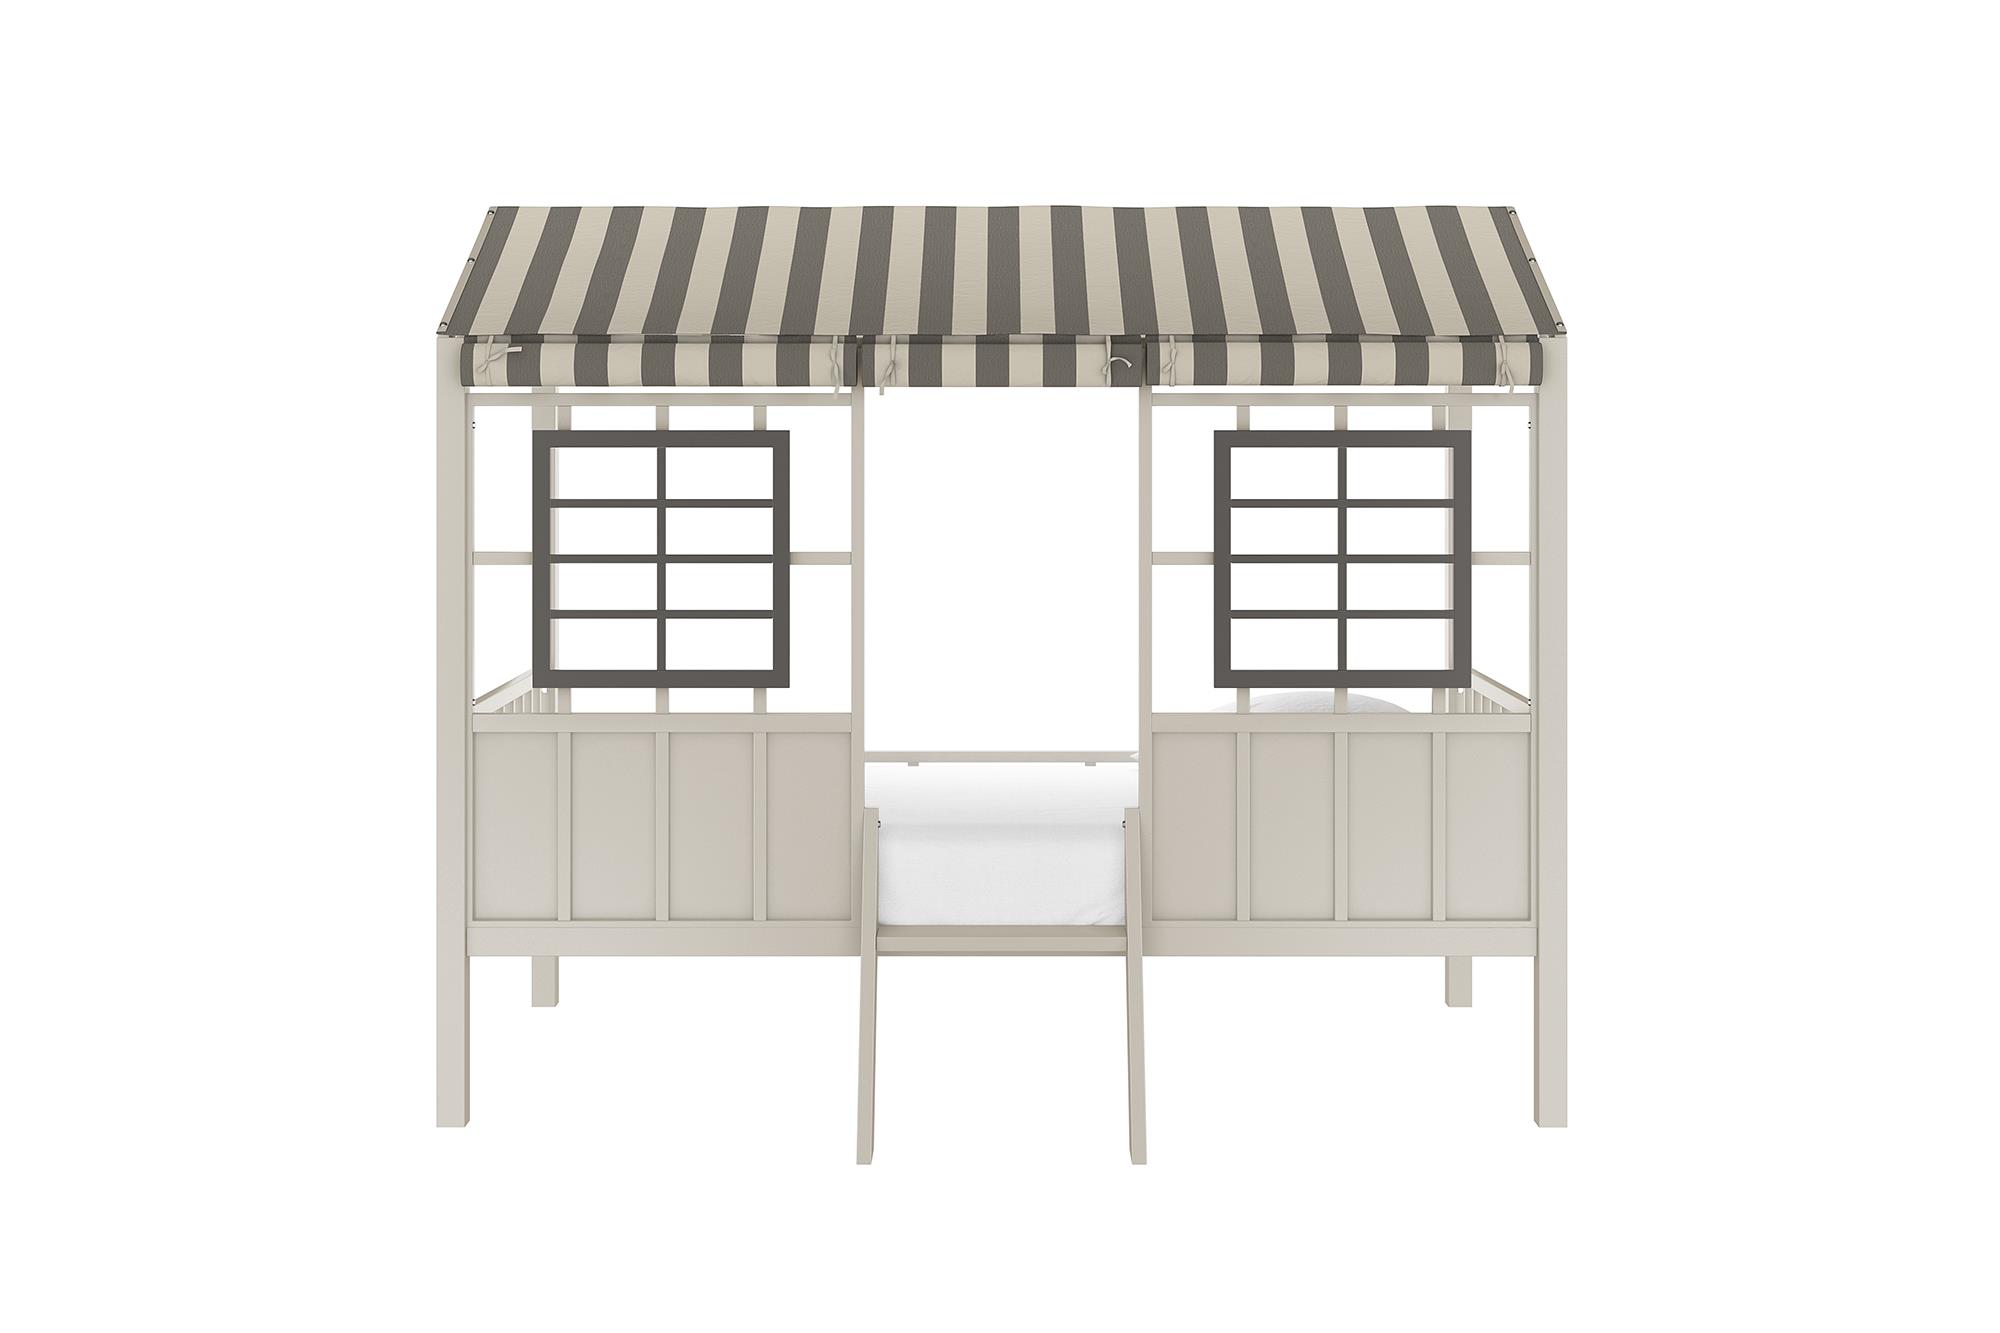 Little Seeds Rowan Valley Forest Loft Bed, Grey/Taupe - Twin - image 1 of 16